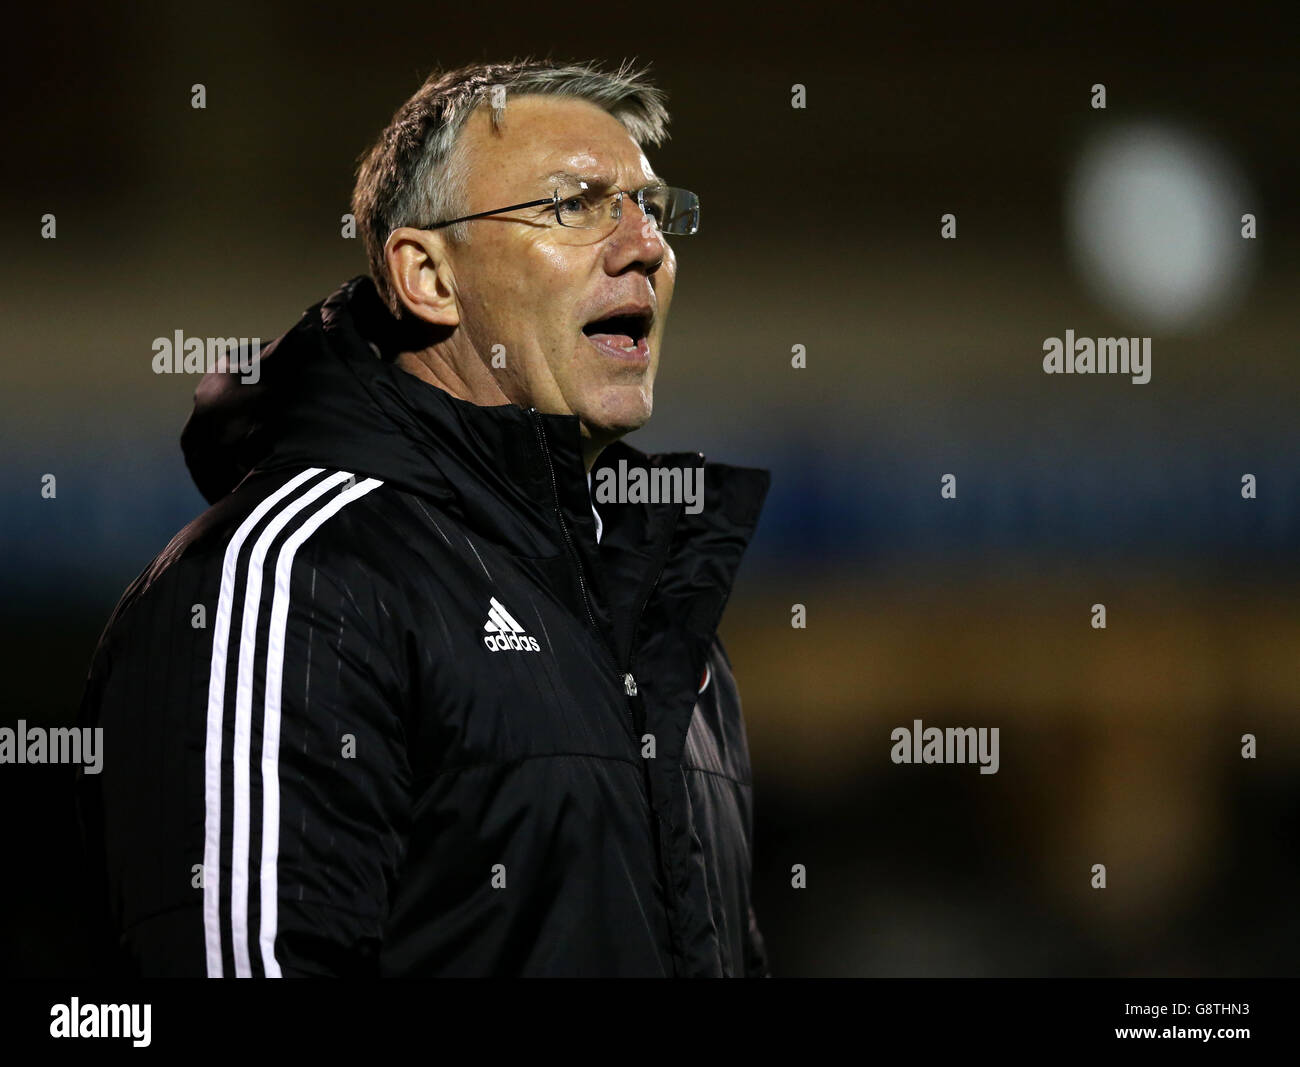 Southend United / Sheffield United - Sky Bet League One - Roots Hall. Sheffield United-Manager Nigel Adkins während des Sky Bet League One-Spiels in Roots Hall, Southend. Stockfoto